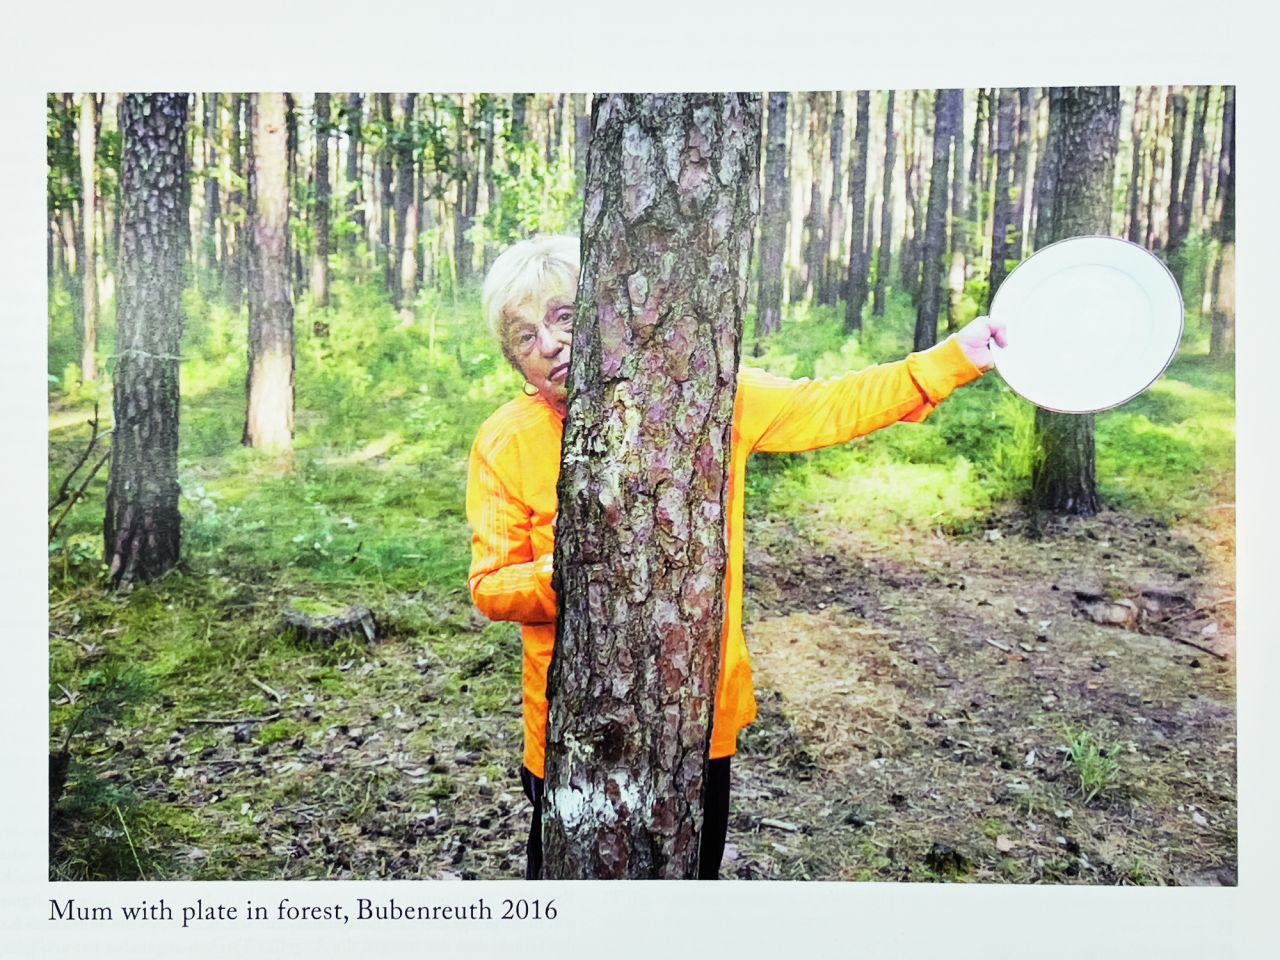 "Mum with plate in forest," Arena Homme Plus, Bubenreuth, Bavaria, 2016